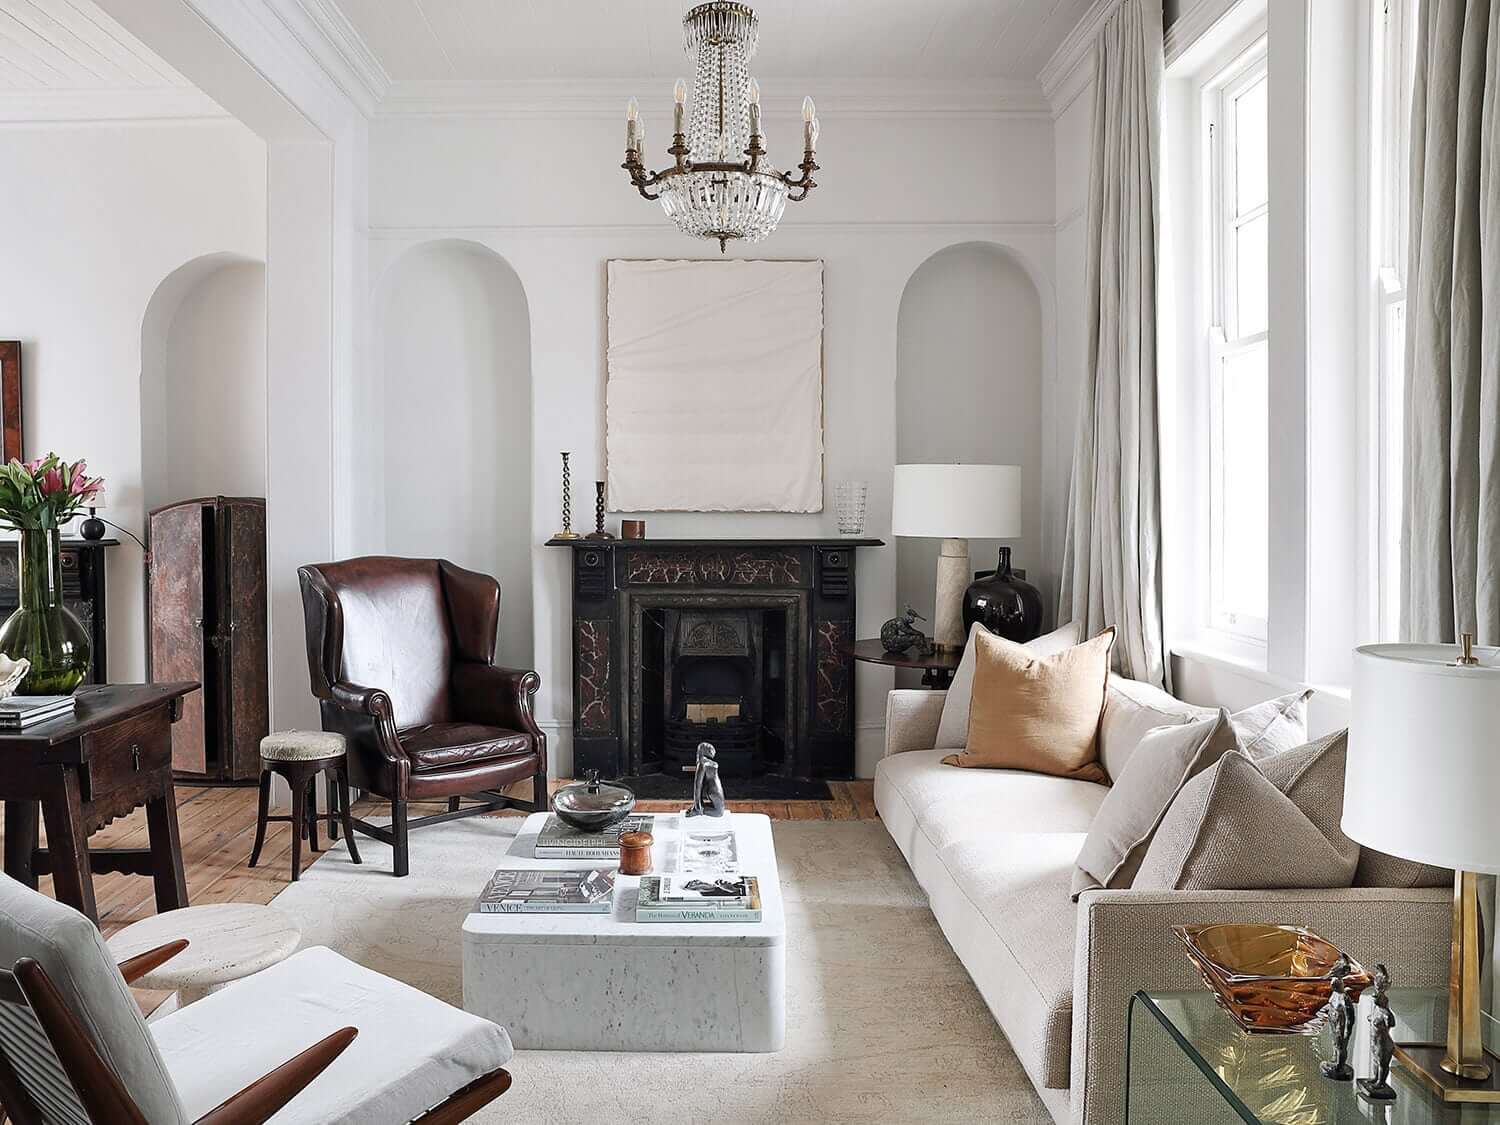 Sophisticated living room with fireplace and carpet over the wooden floor, photograph by Elsa Young